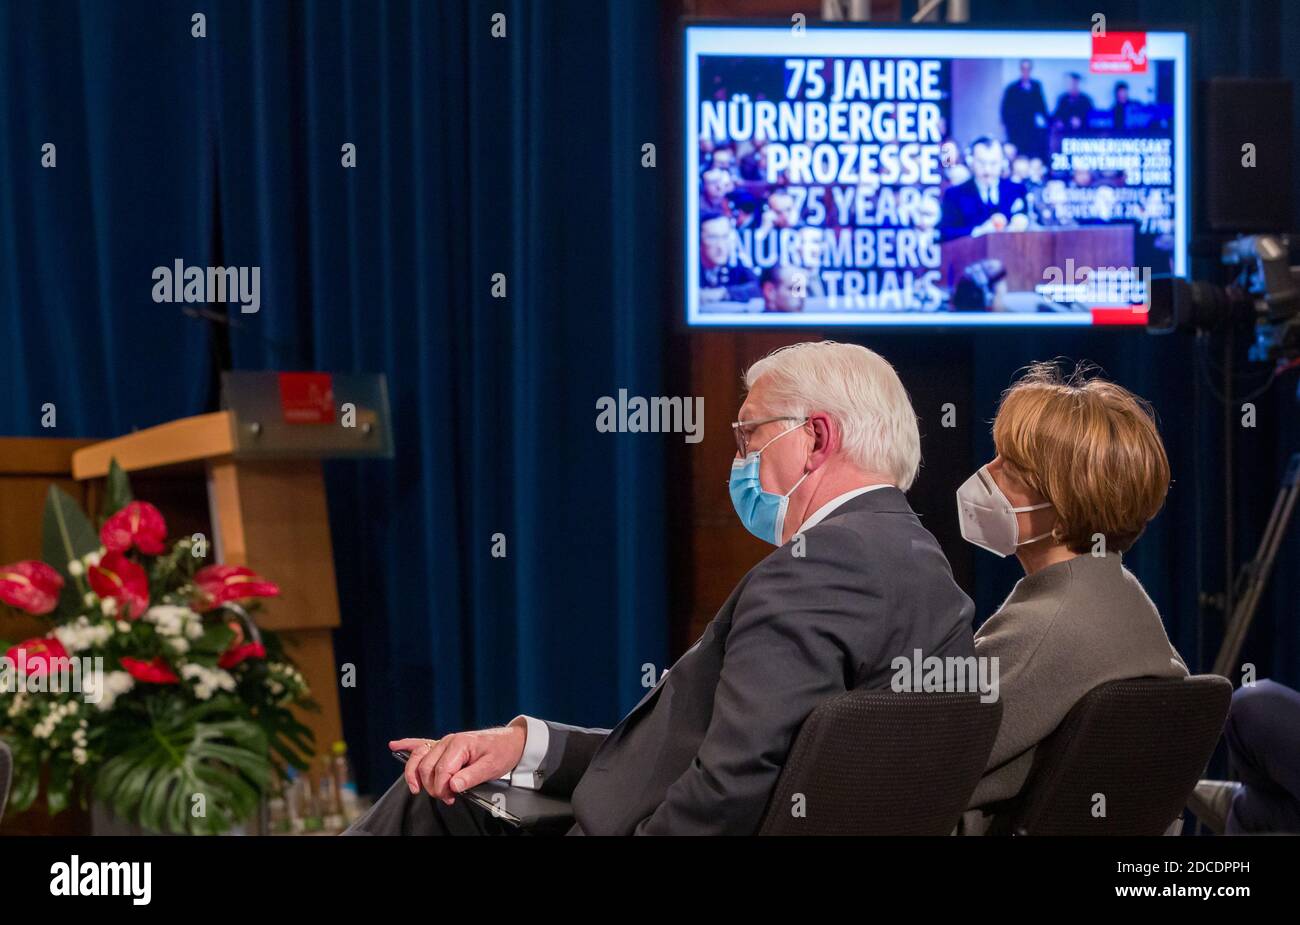 Nuremberg, Germany. 20th Nov, 2020. Federal President Frank-Walter Steinmeier and his wife Elke Büdenbender are following a panel discussion during the ceremony marking the 75th anniversary of the start of the Nuremberg war crimes trials in Room 600 of the Nuremberg Palace of Justice. Credit: Daniel Karmann/dpa-Pool/dpa/Alamy Live News Stock Photo